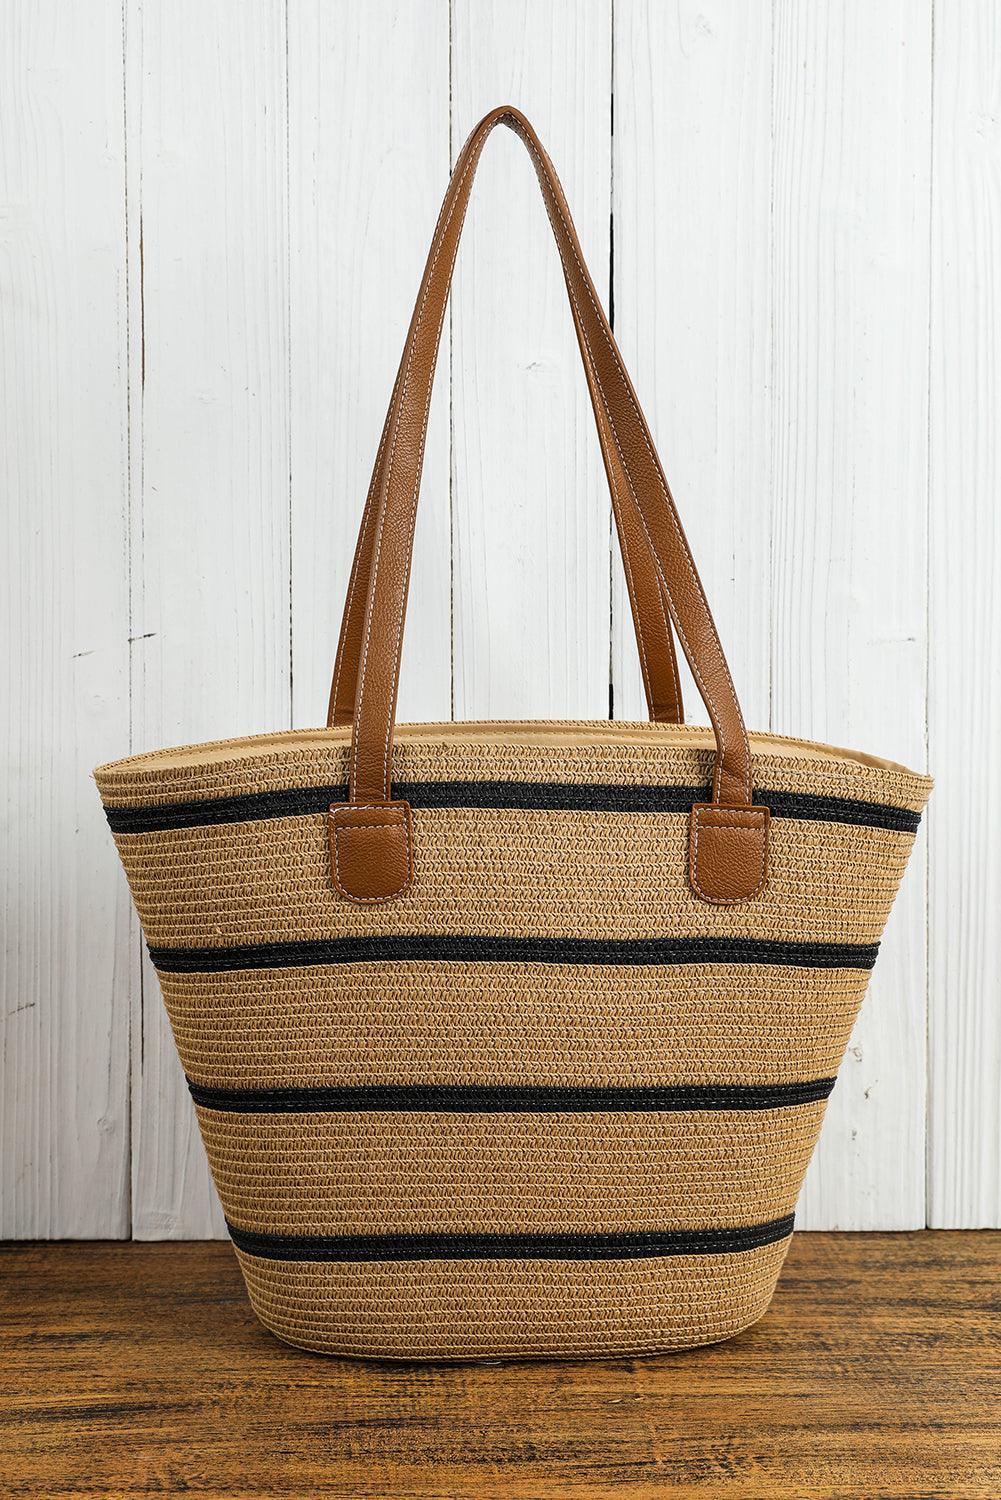 Black Straw Woven Striped Vacation One Shoulder Bag